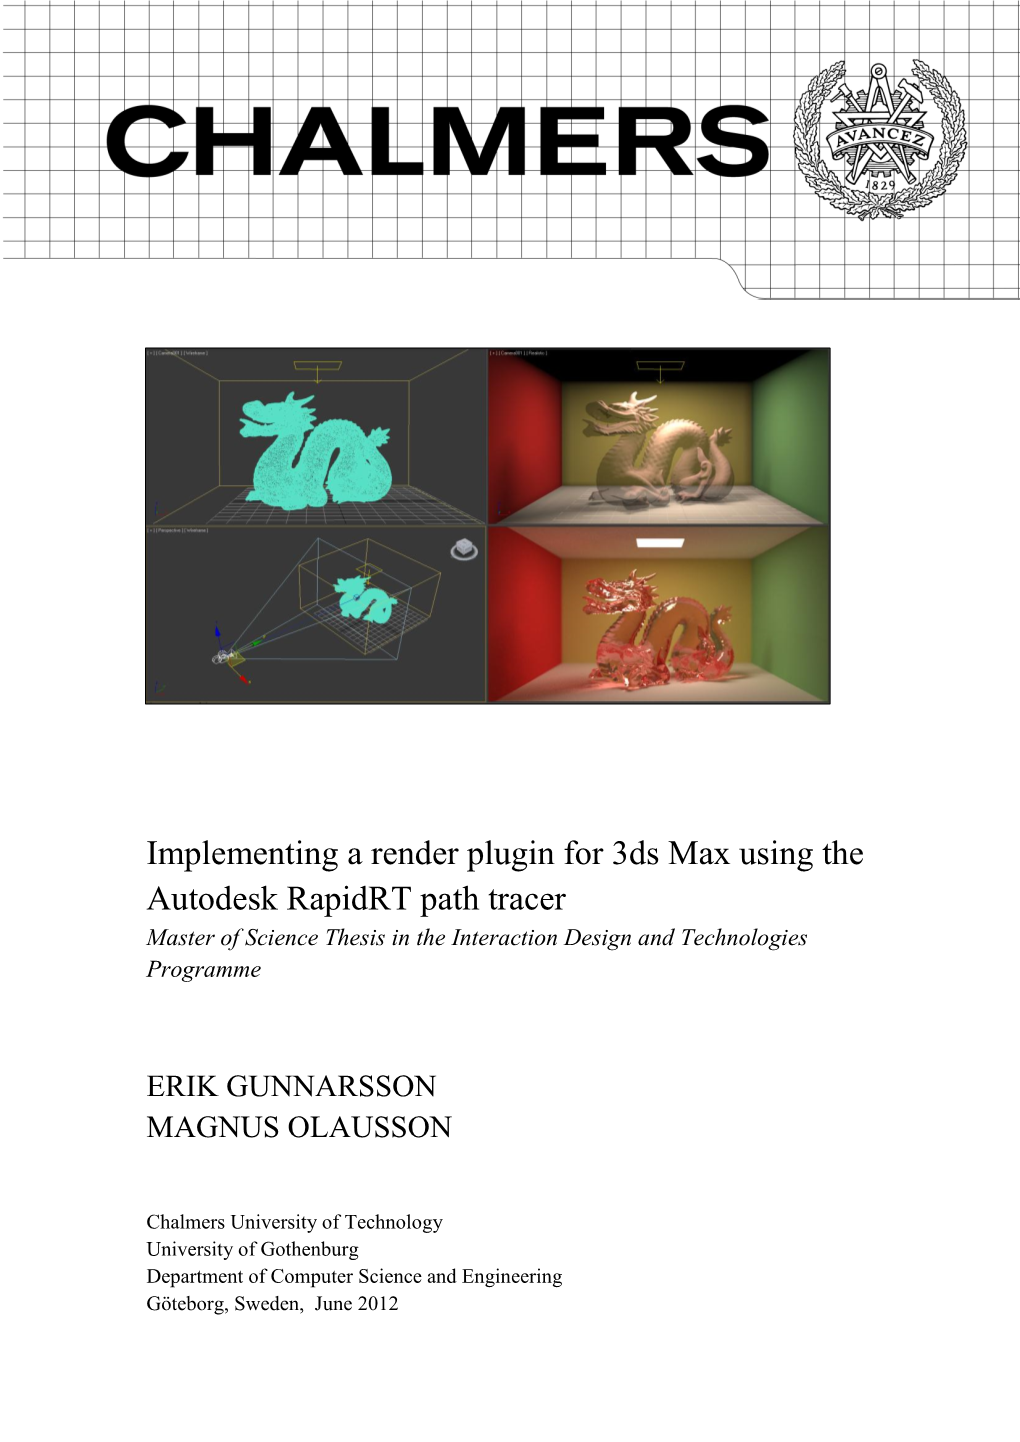 Implementing a Render Plugin for 3Ds Max Using the Autodesk Rapidrt Path Tracer Master of Science Thesis in the Interaction Design and Technologies Programme